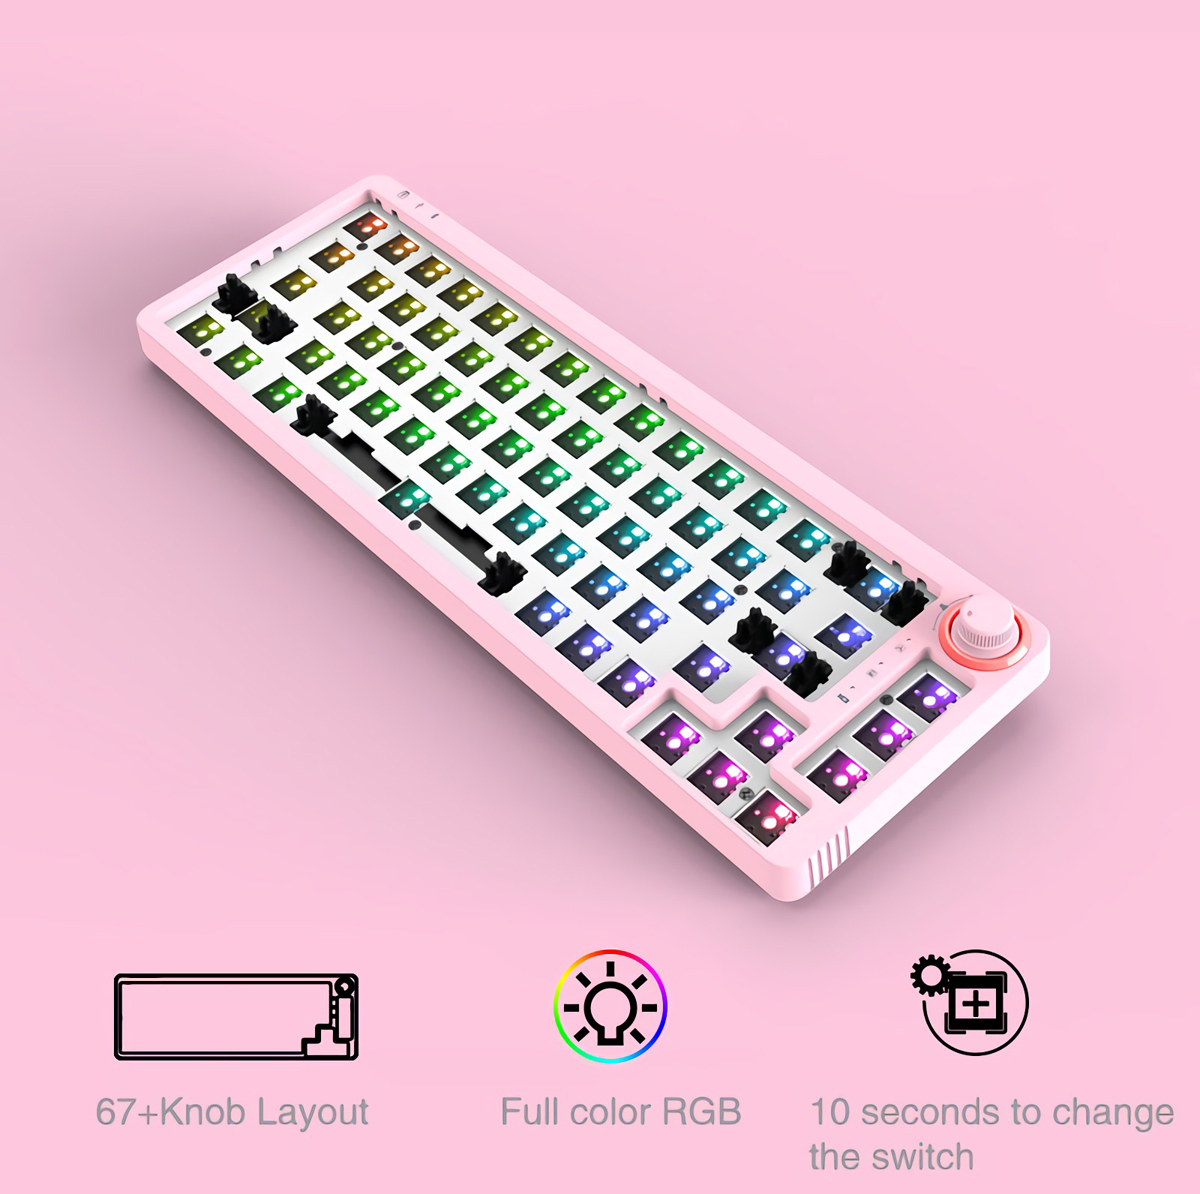 GAMAKAY LK67 Keyboard Customized Kit 67 Keys RGB Hot Swappable 3pin/5pin Switch 65% Programmable Triple Mode Wired bluetooth 5.0 2.4GHz Keyboard Kit NKRO PCB Mounting Plate Case with Rotate Button Custom Keyboard